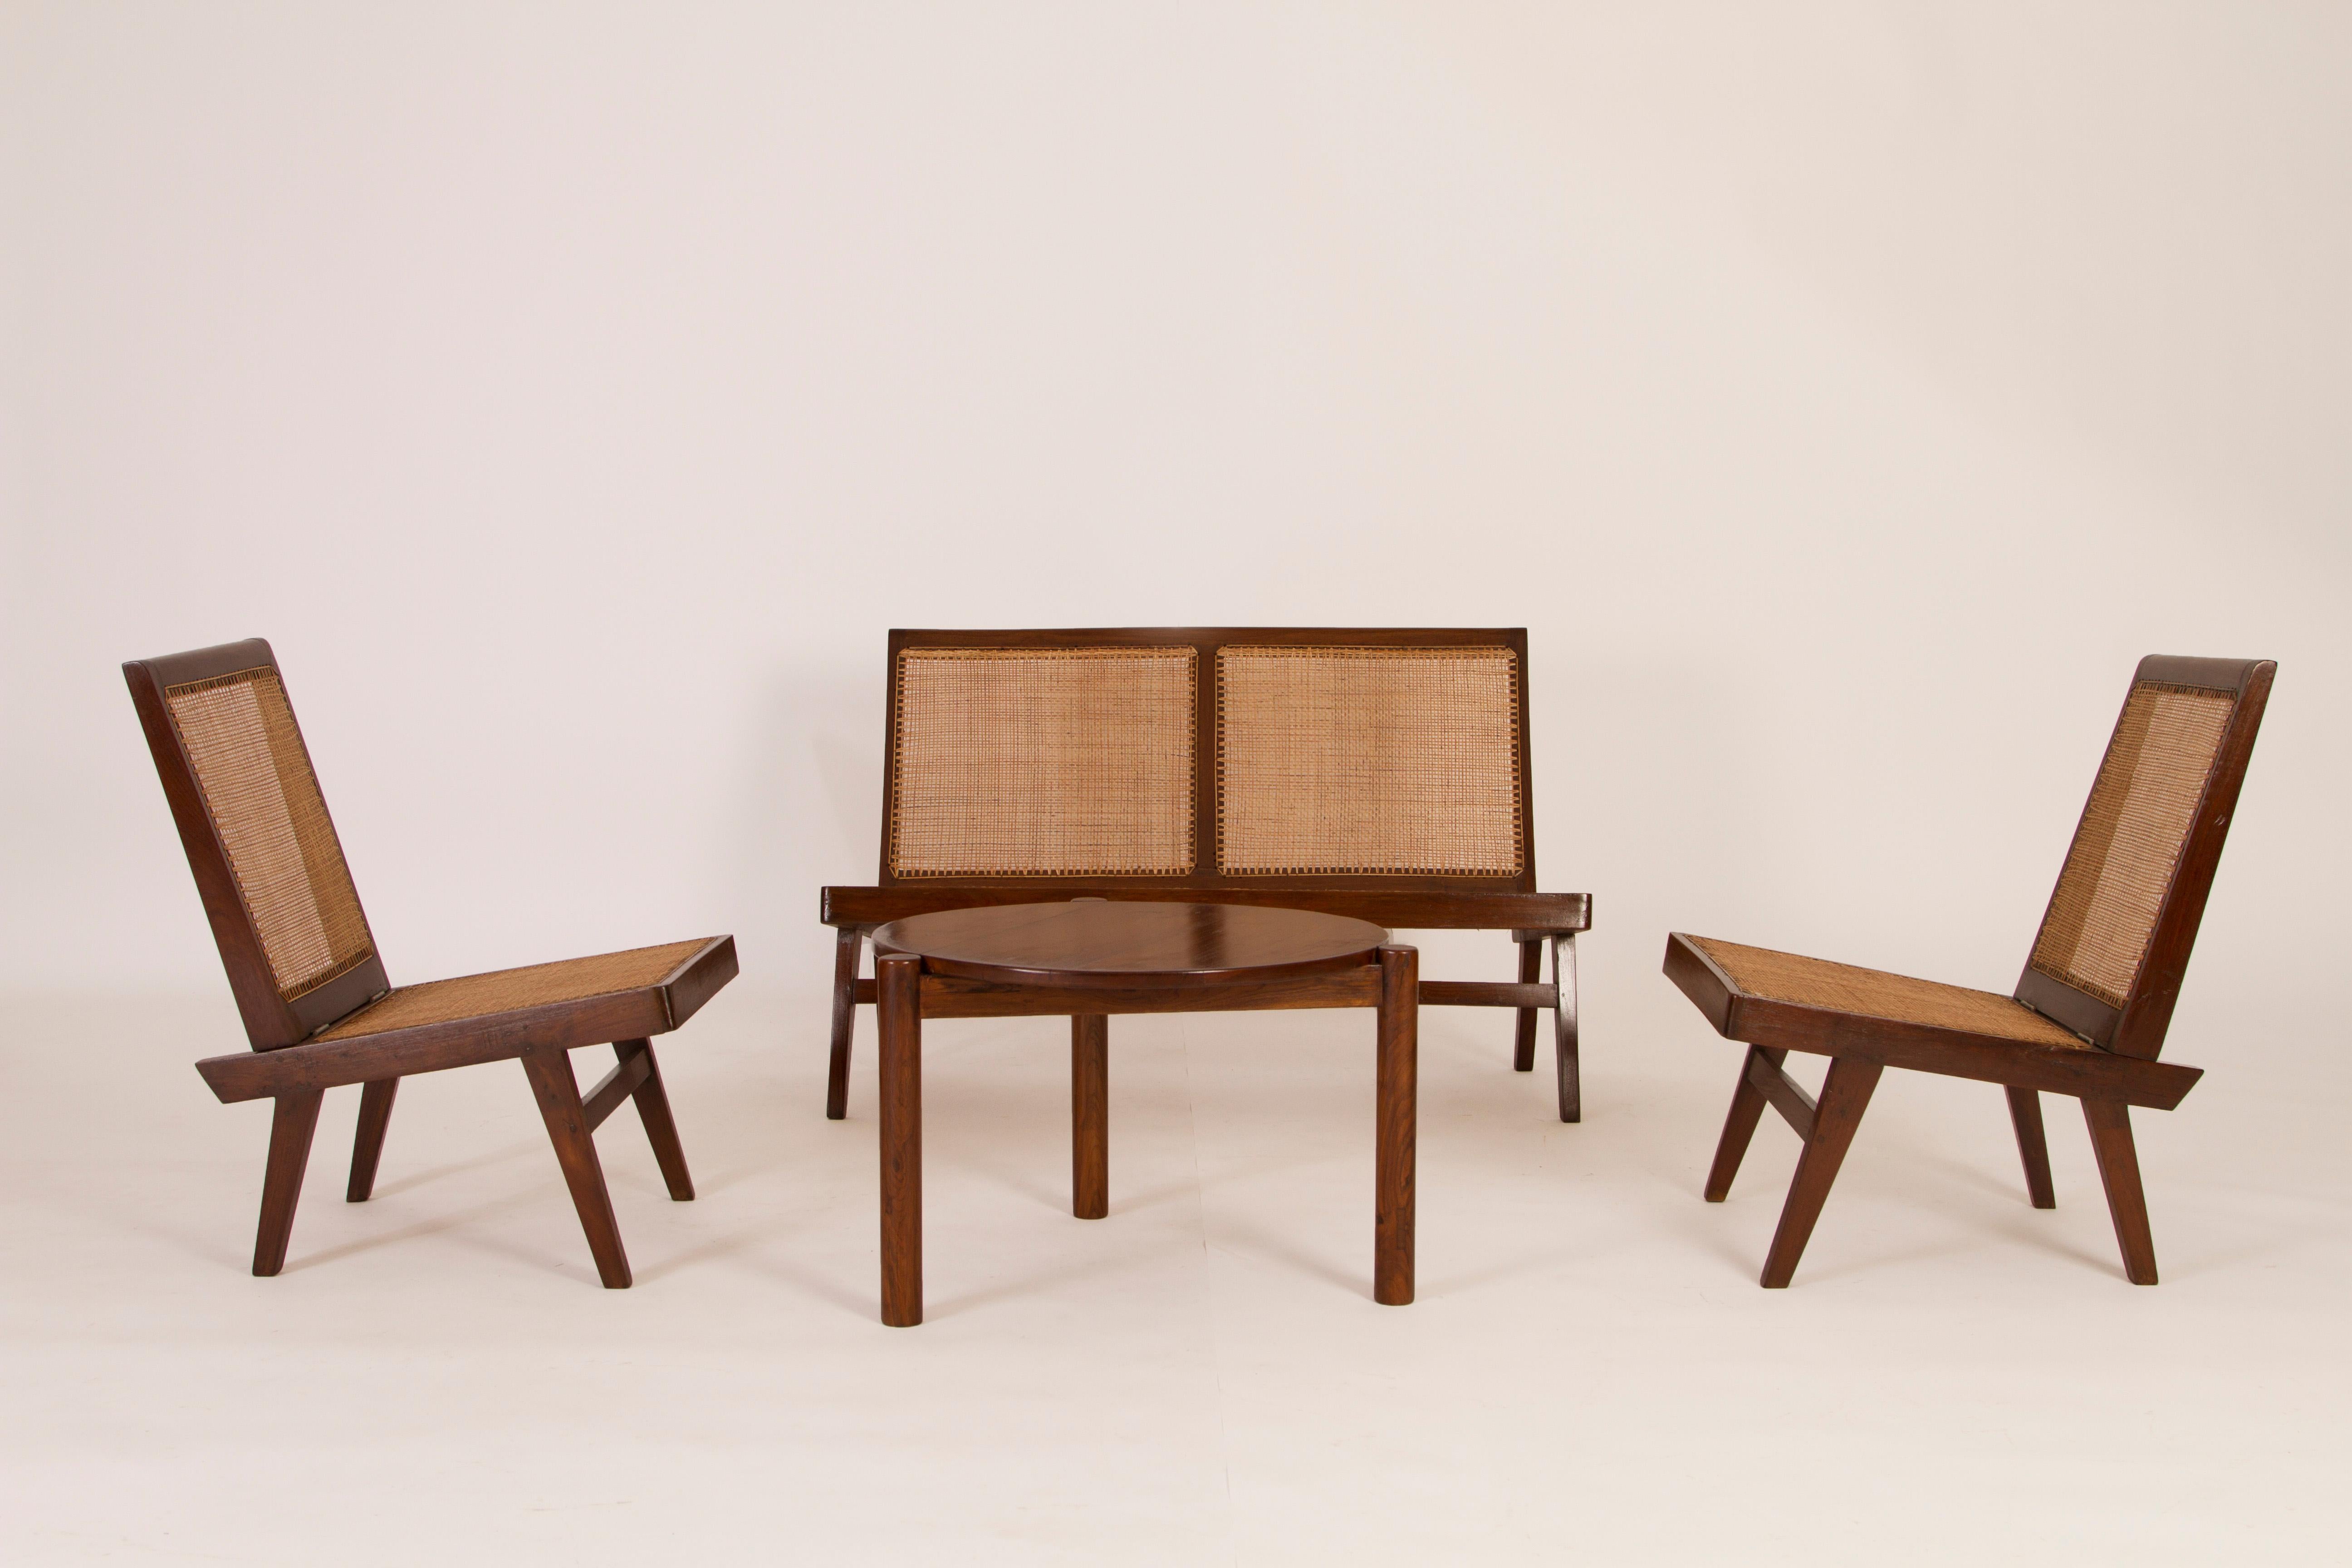 Pierre Jeanneret three-piece folding cane sofa and chairs, teak and cane
Provenance: Private Residences, Chandigarth. India.